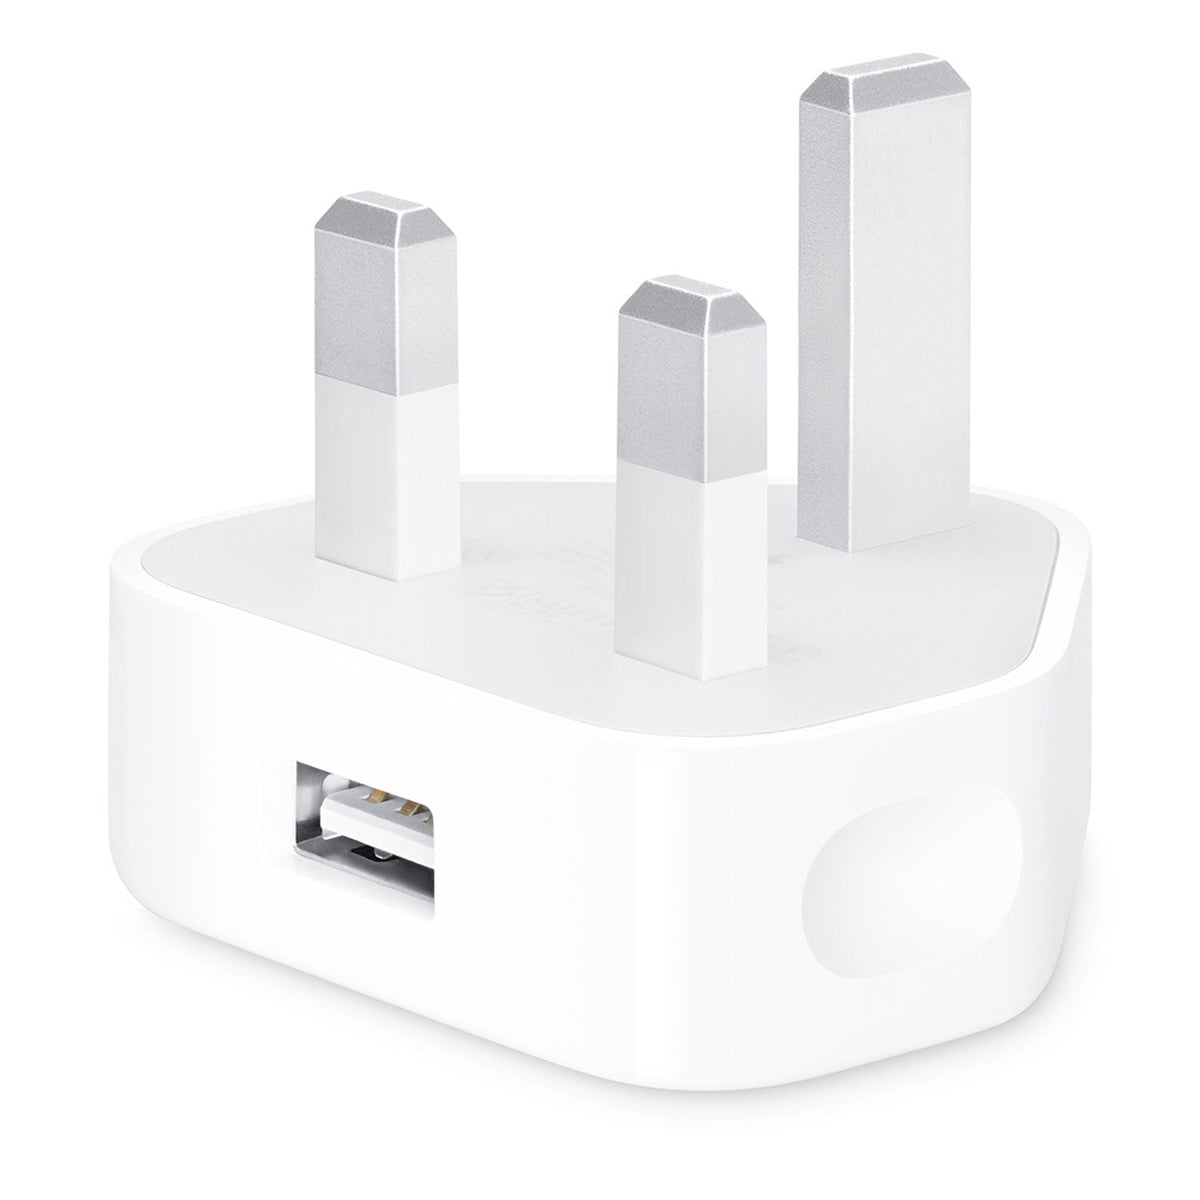 5W USB POWER ADAPTER FOR IPHONE - UK VERSION